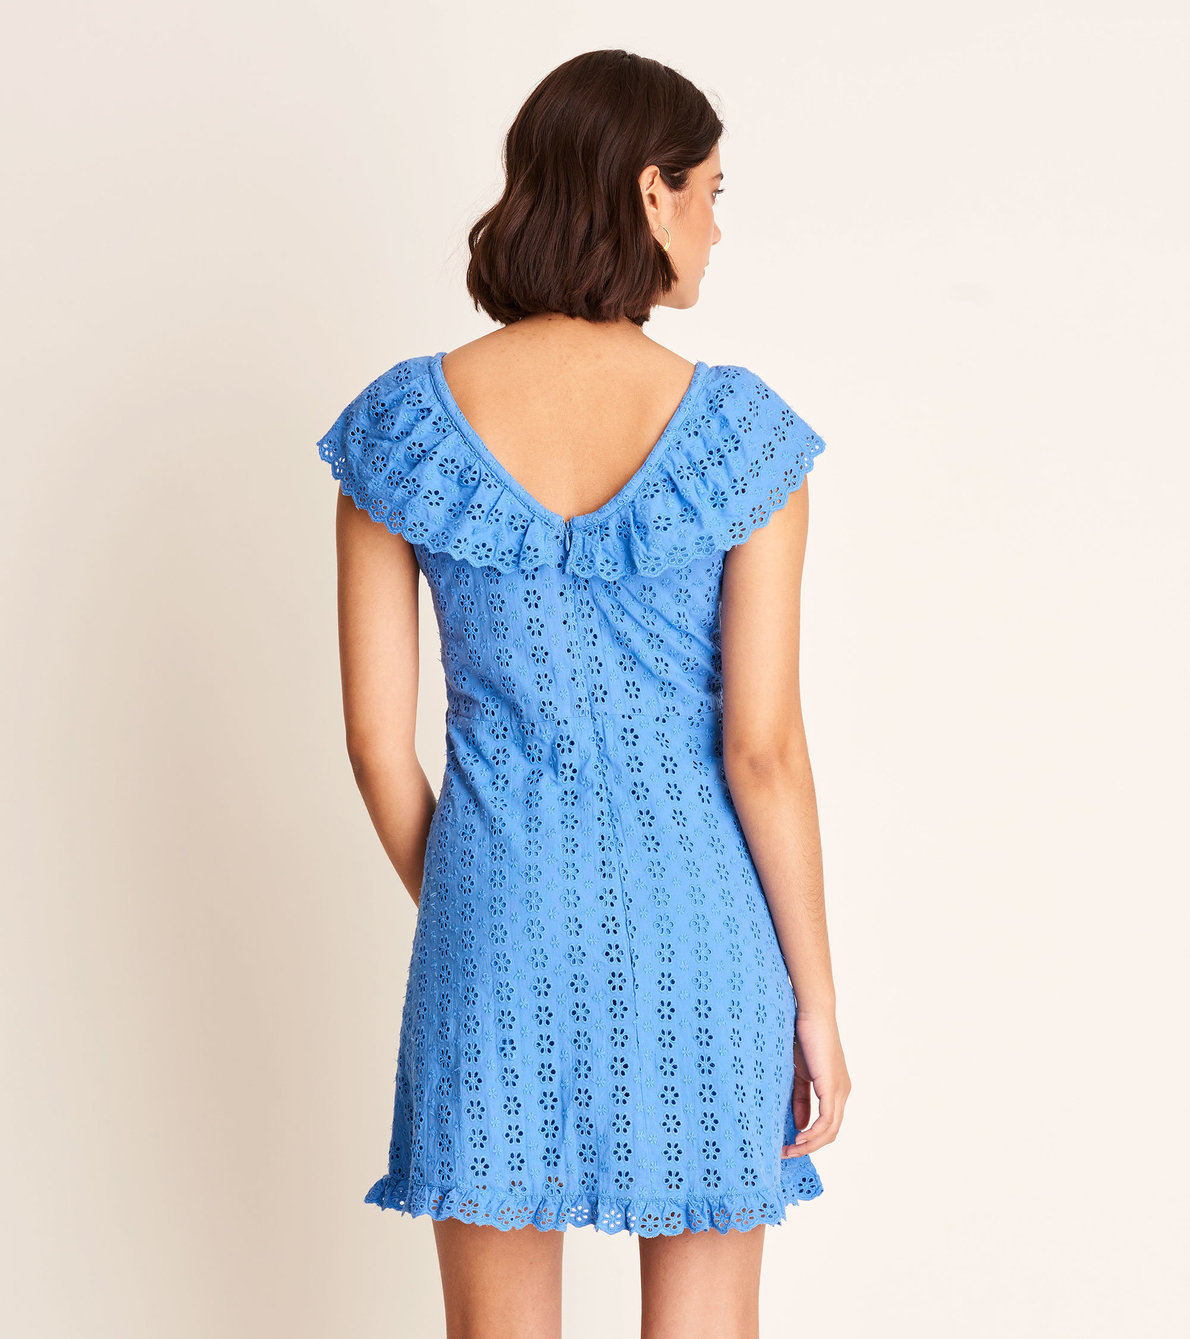 View larger image of Eyelet Shift Dress - Periwinkle